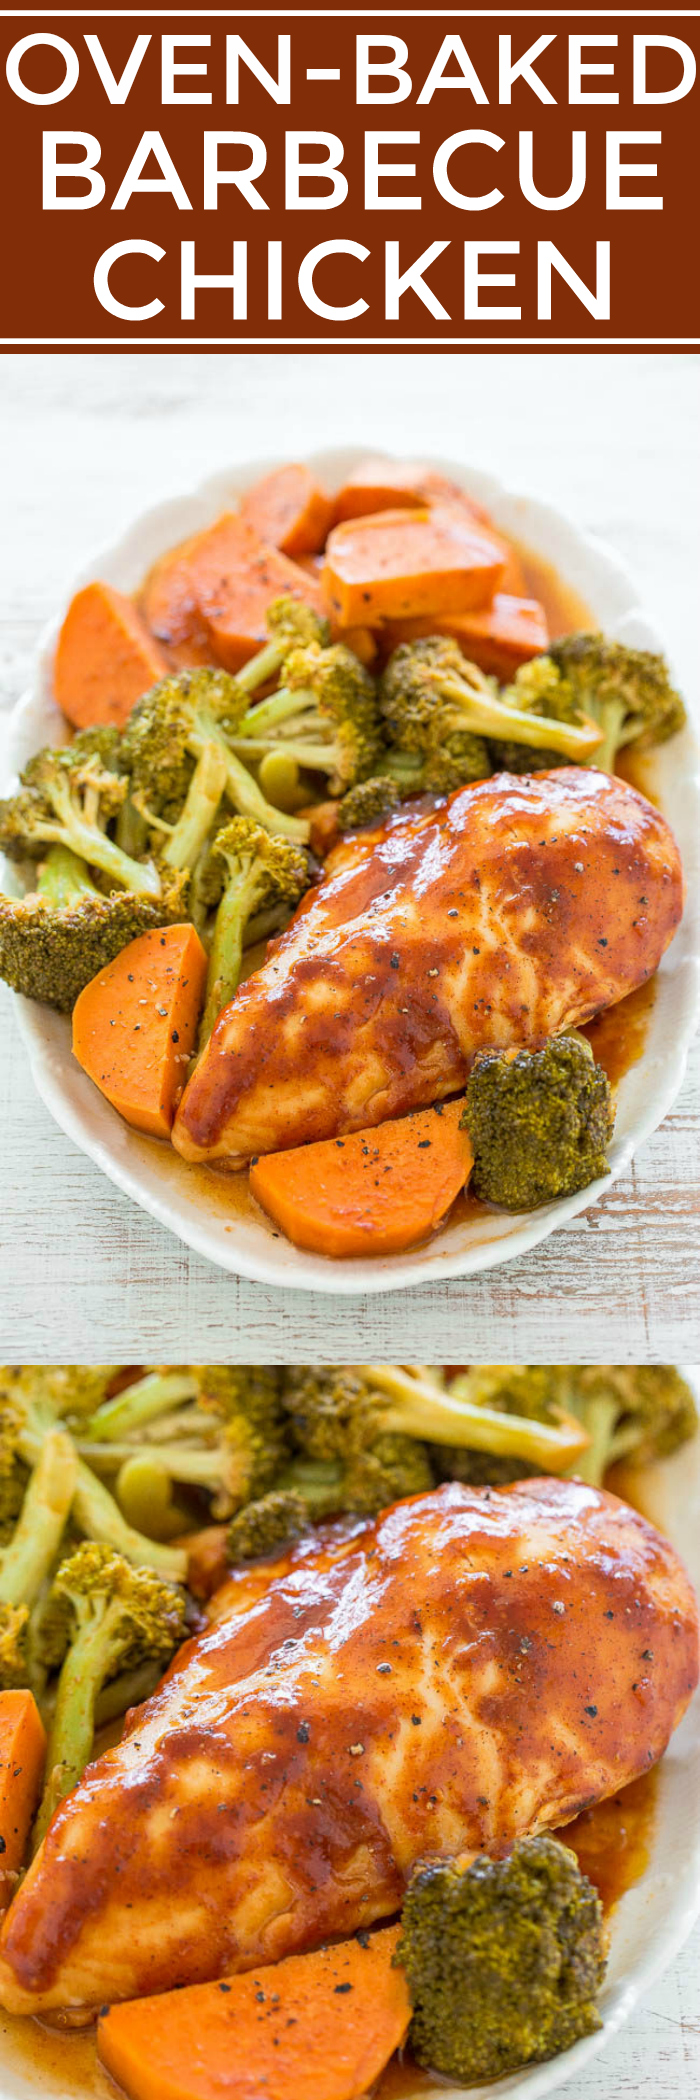 Oven-Baked Barbecue Chicken - Chicken, sweet potatoes, and broccoli all bake together for an EASY, healthy meal that's made in ONE pan in under ONE hour!! The chicken is so juicy and loaded with FLAVOR!!